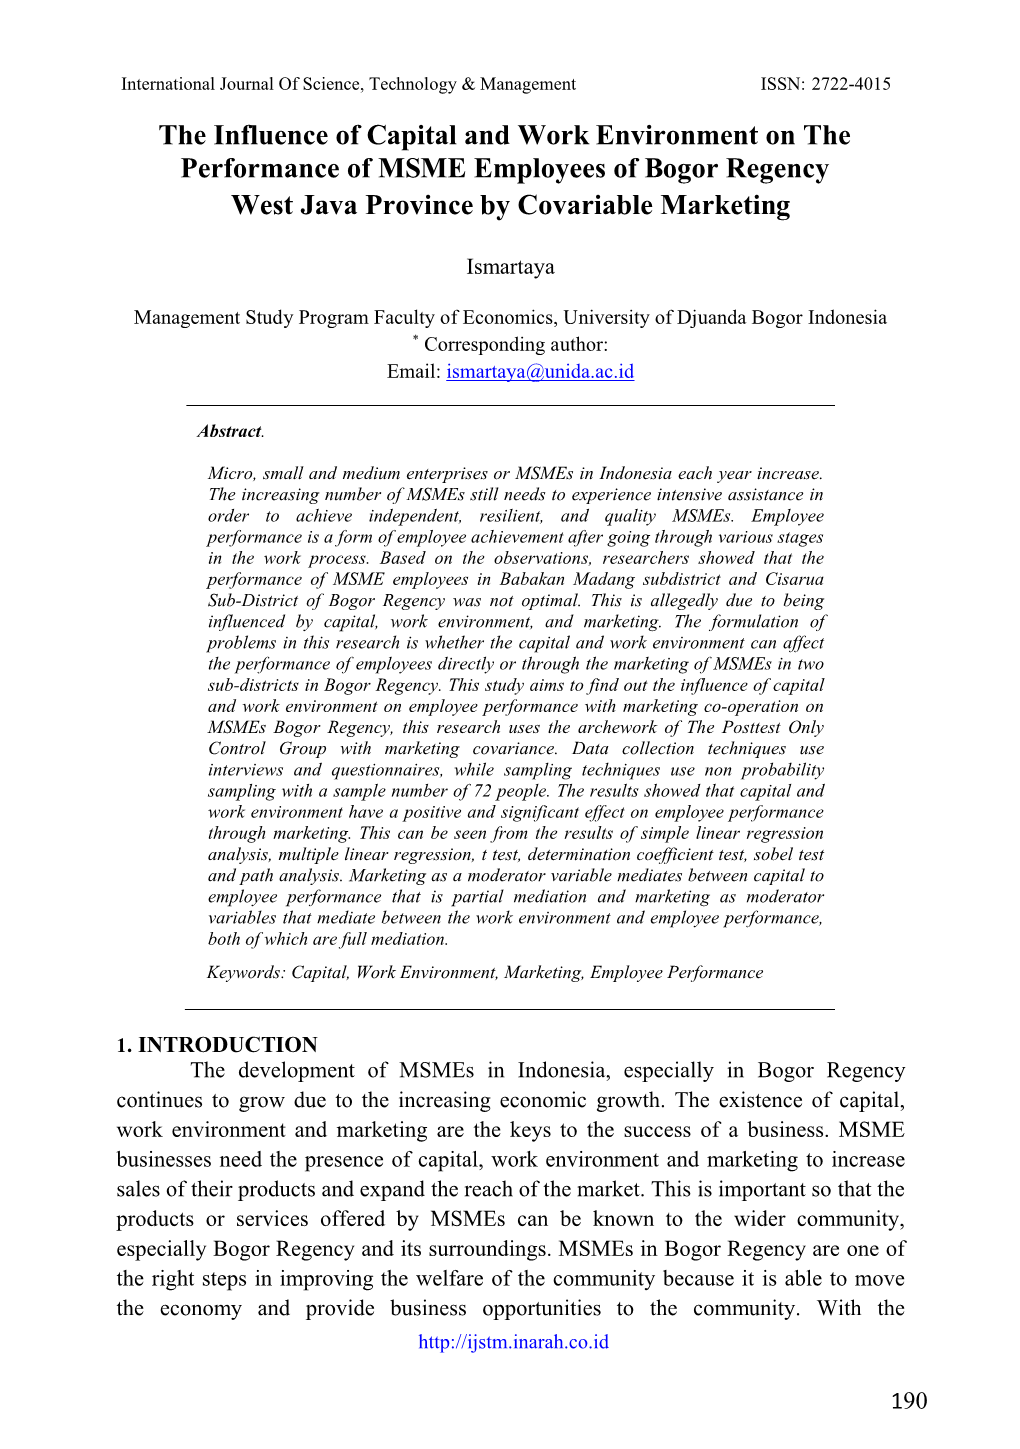 The Influence of Capital and Work Environment on the Performance of MSME Employees of Bogor Regency West Java Province by Covariable Marketing